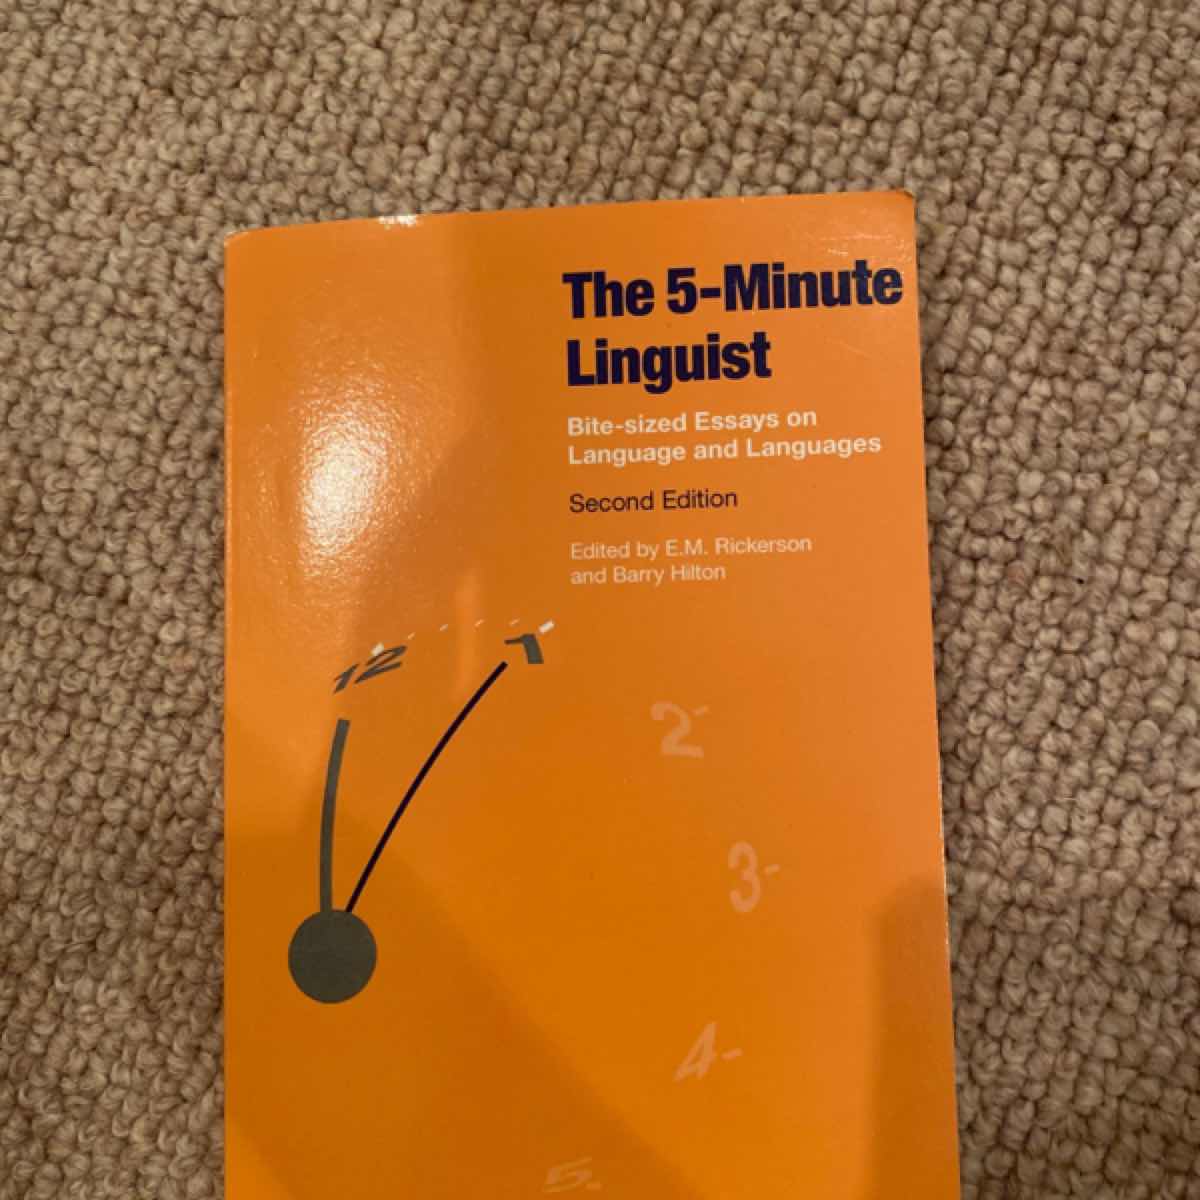 The  5-Minute Linguist